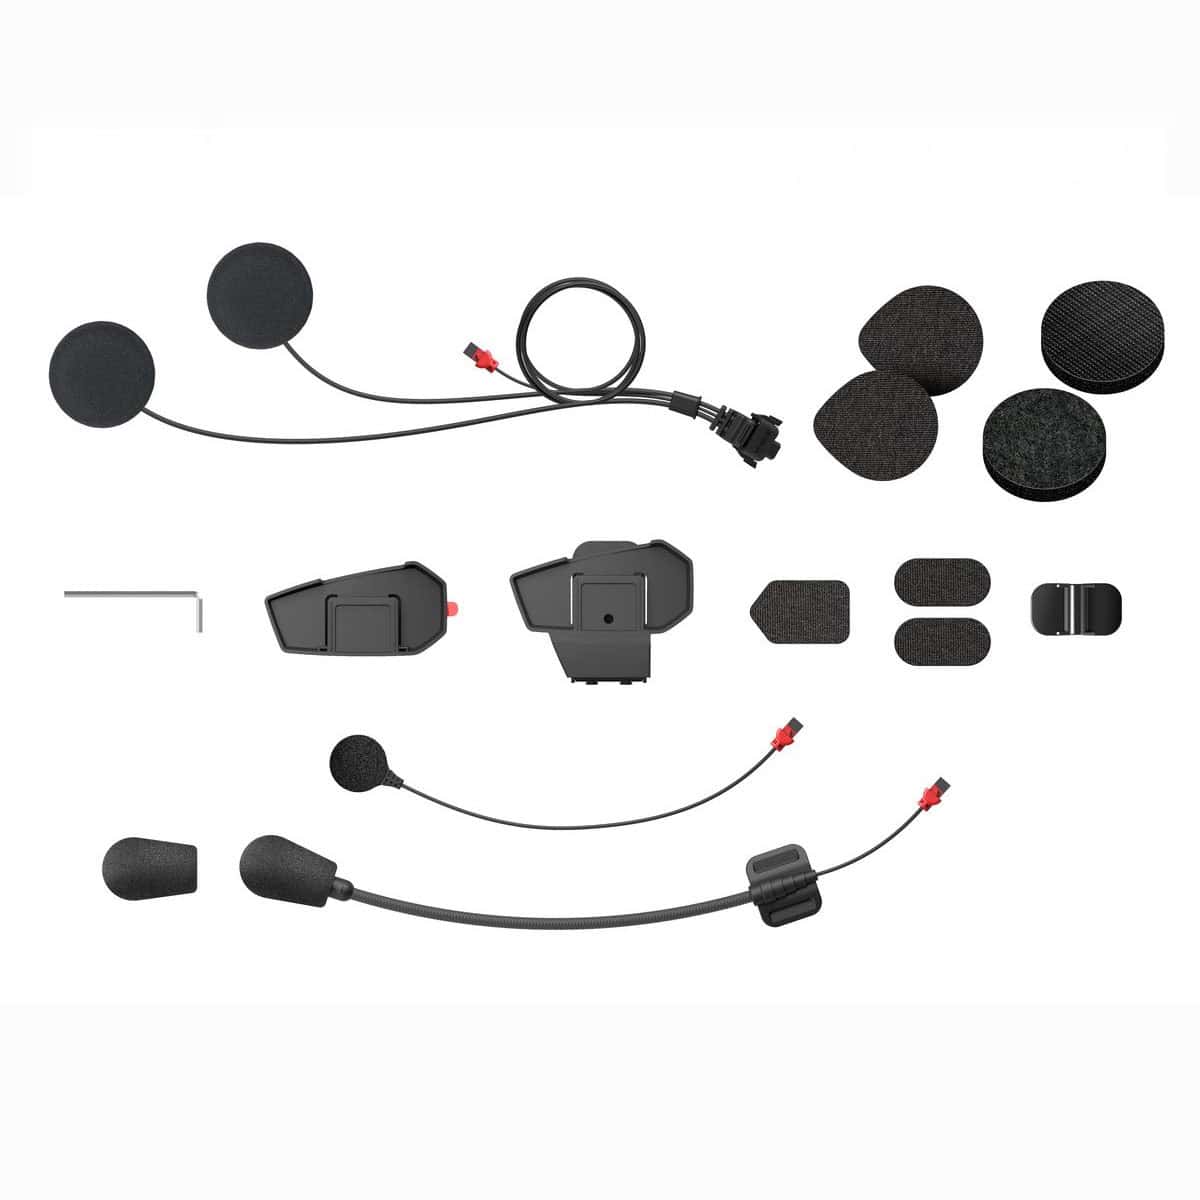 Sena Part Number SPIDER-ST1-A01 to replace a broken helmet headset clamp kit or add a helmet headset clamp kit to a second helmet. Part fits Sena Spider ST1 intercoms.